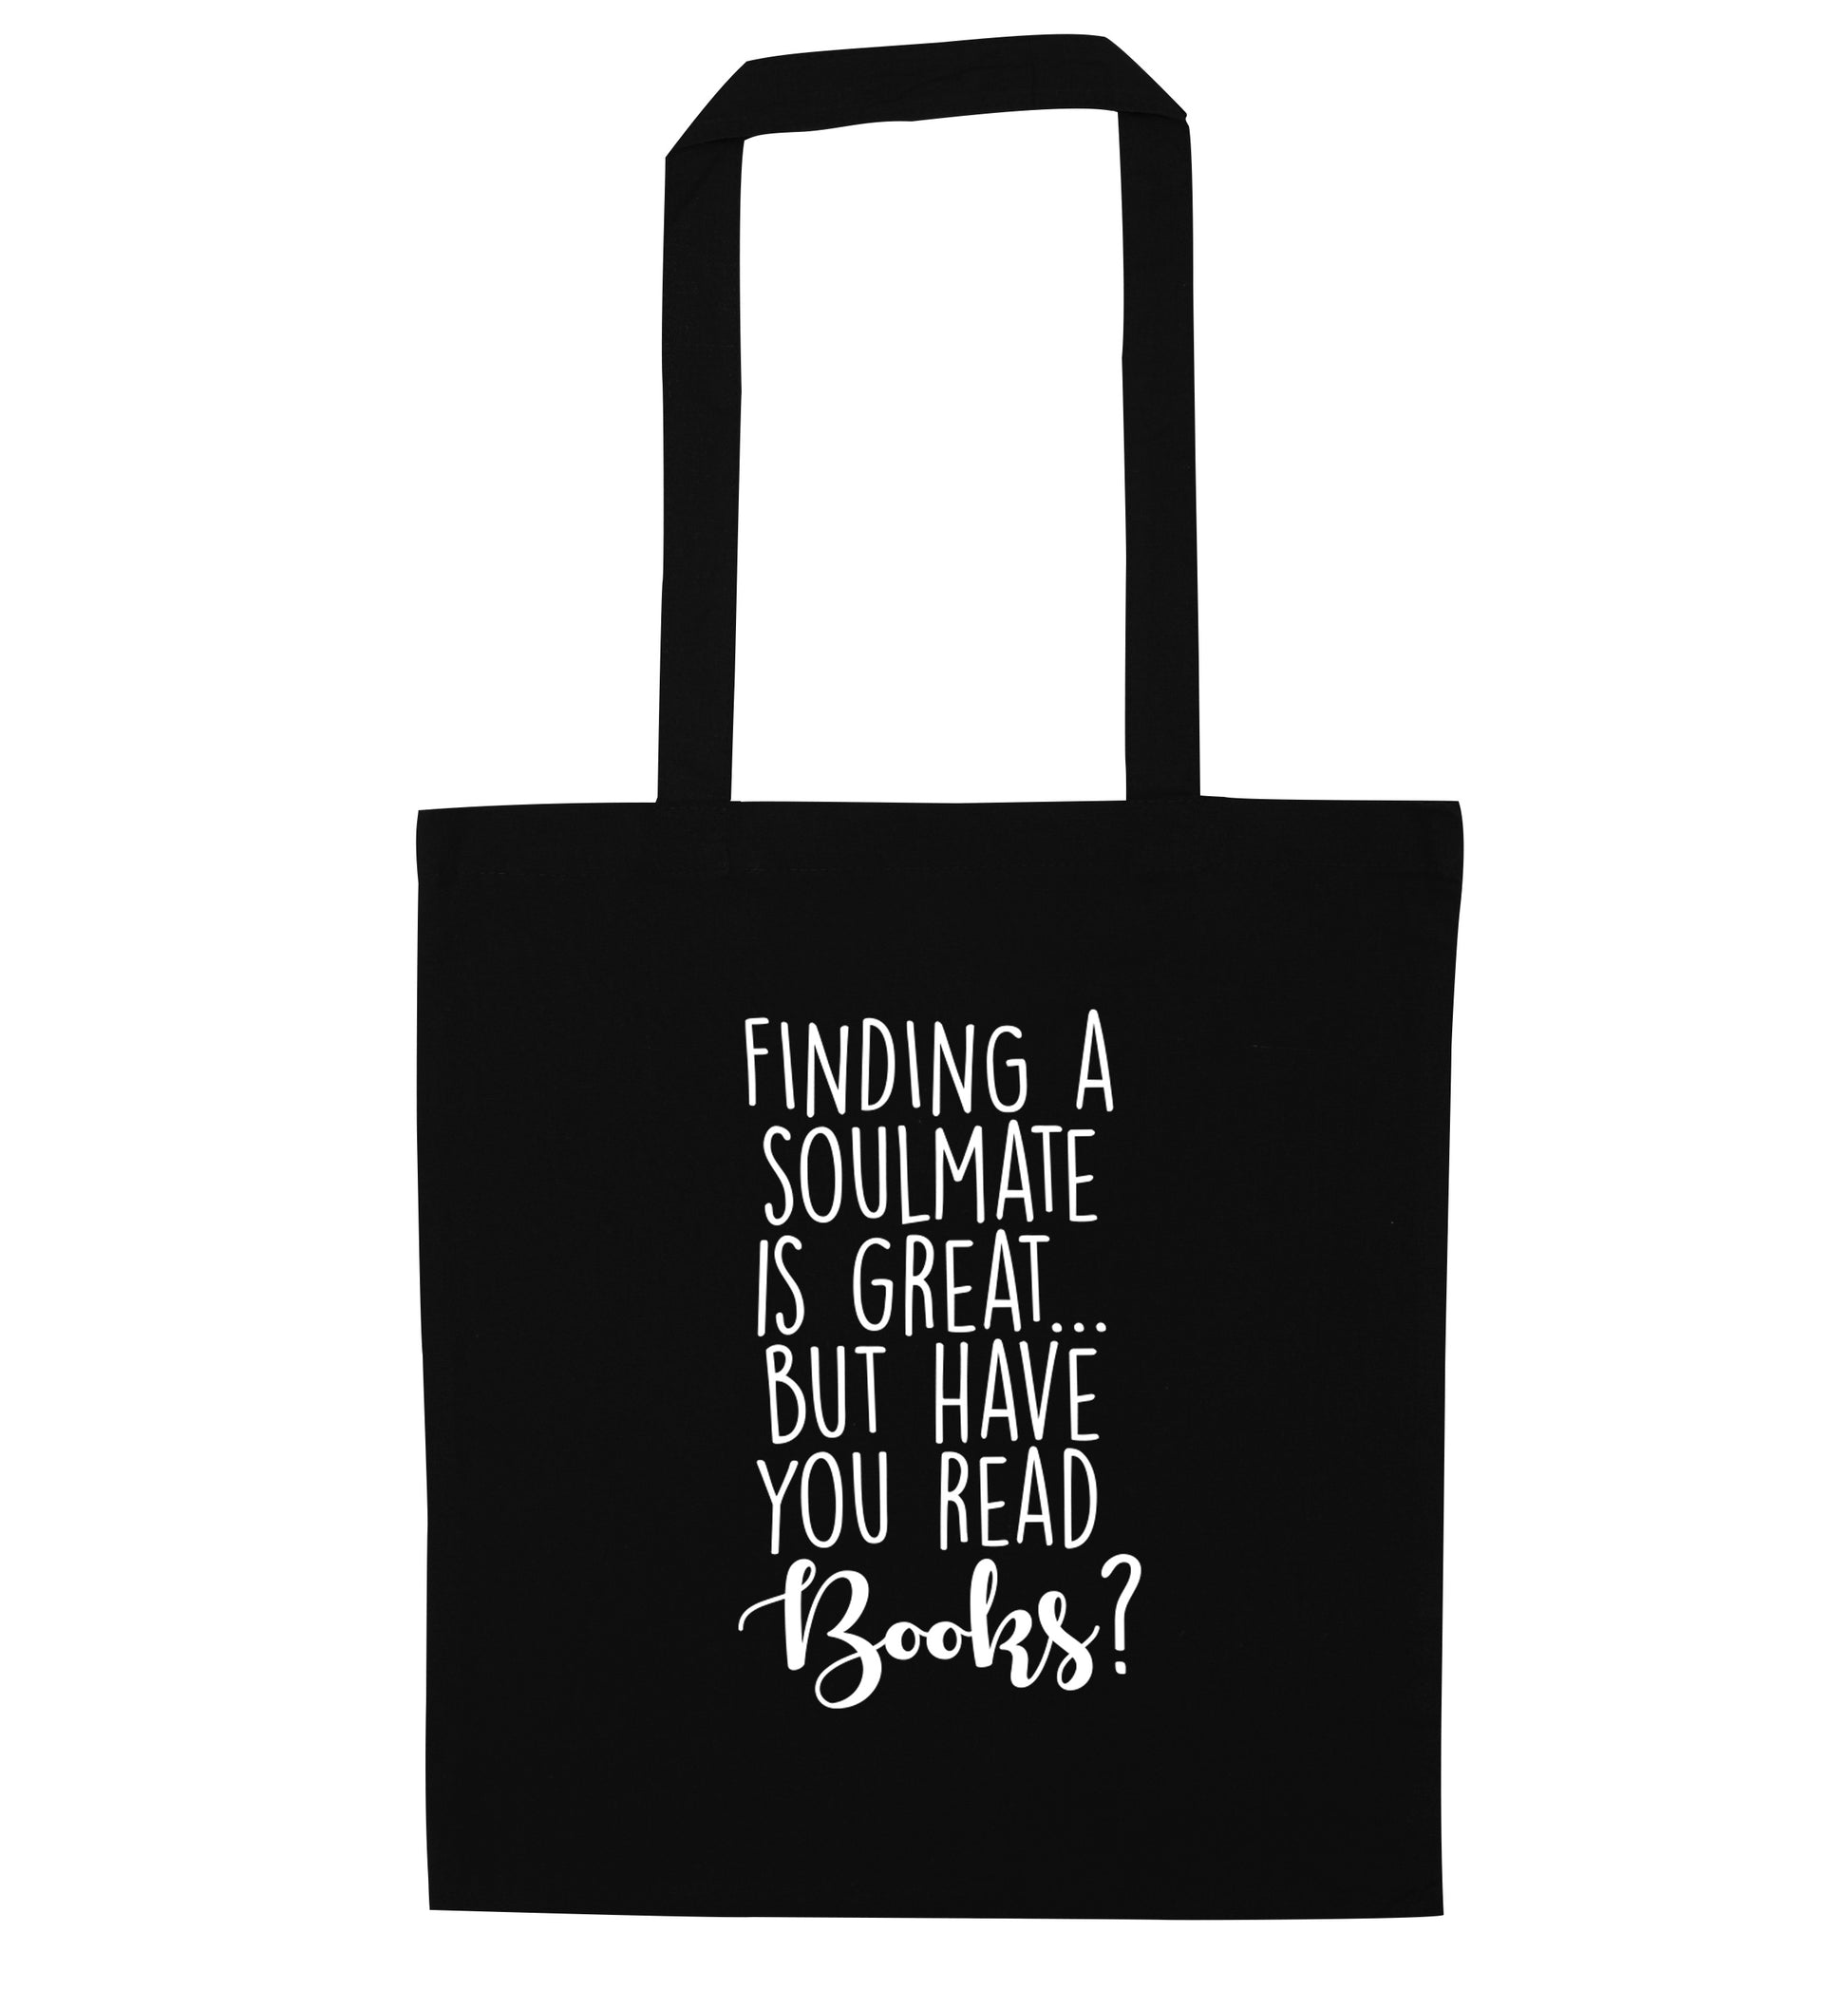 Finding a soulmate is great but have you read books? black tote bag